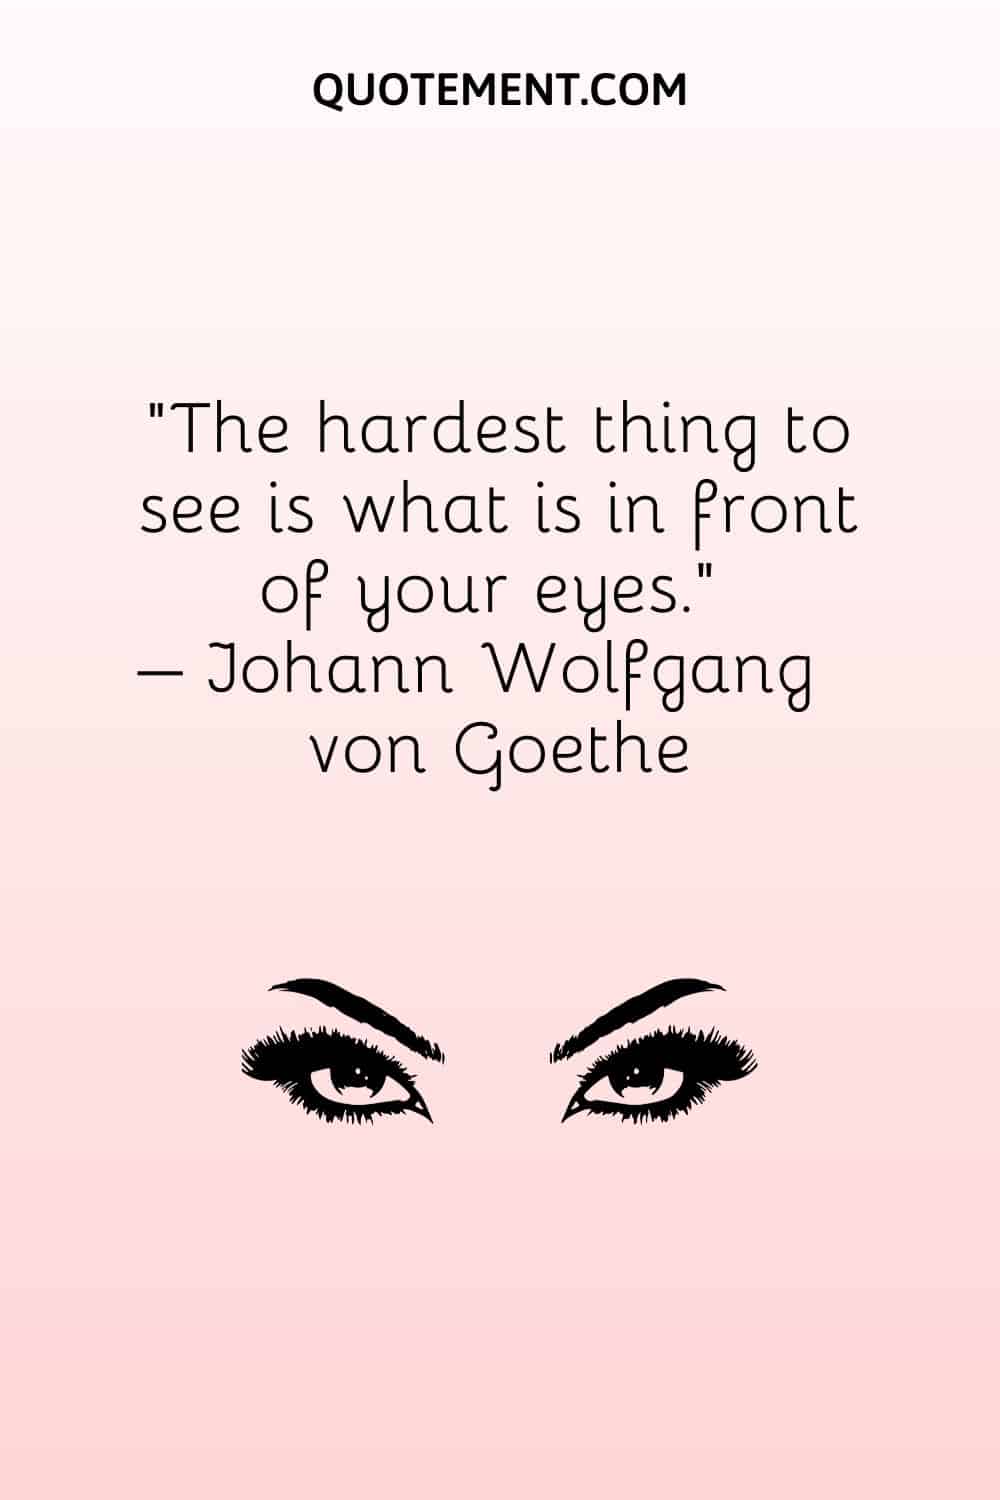 The hardest thing to see is what is in front of your eyes